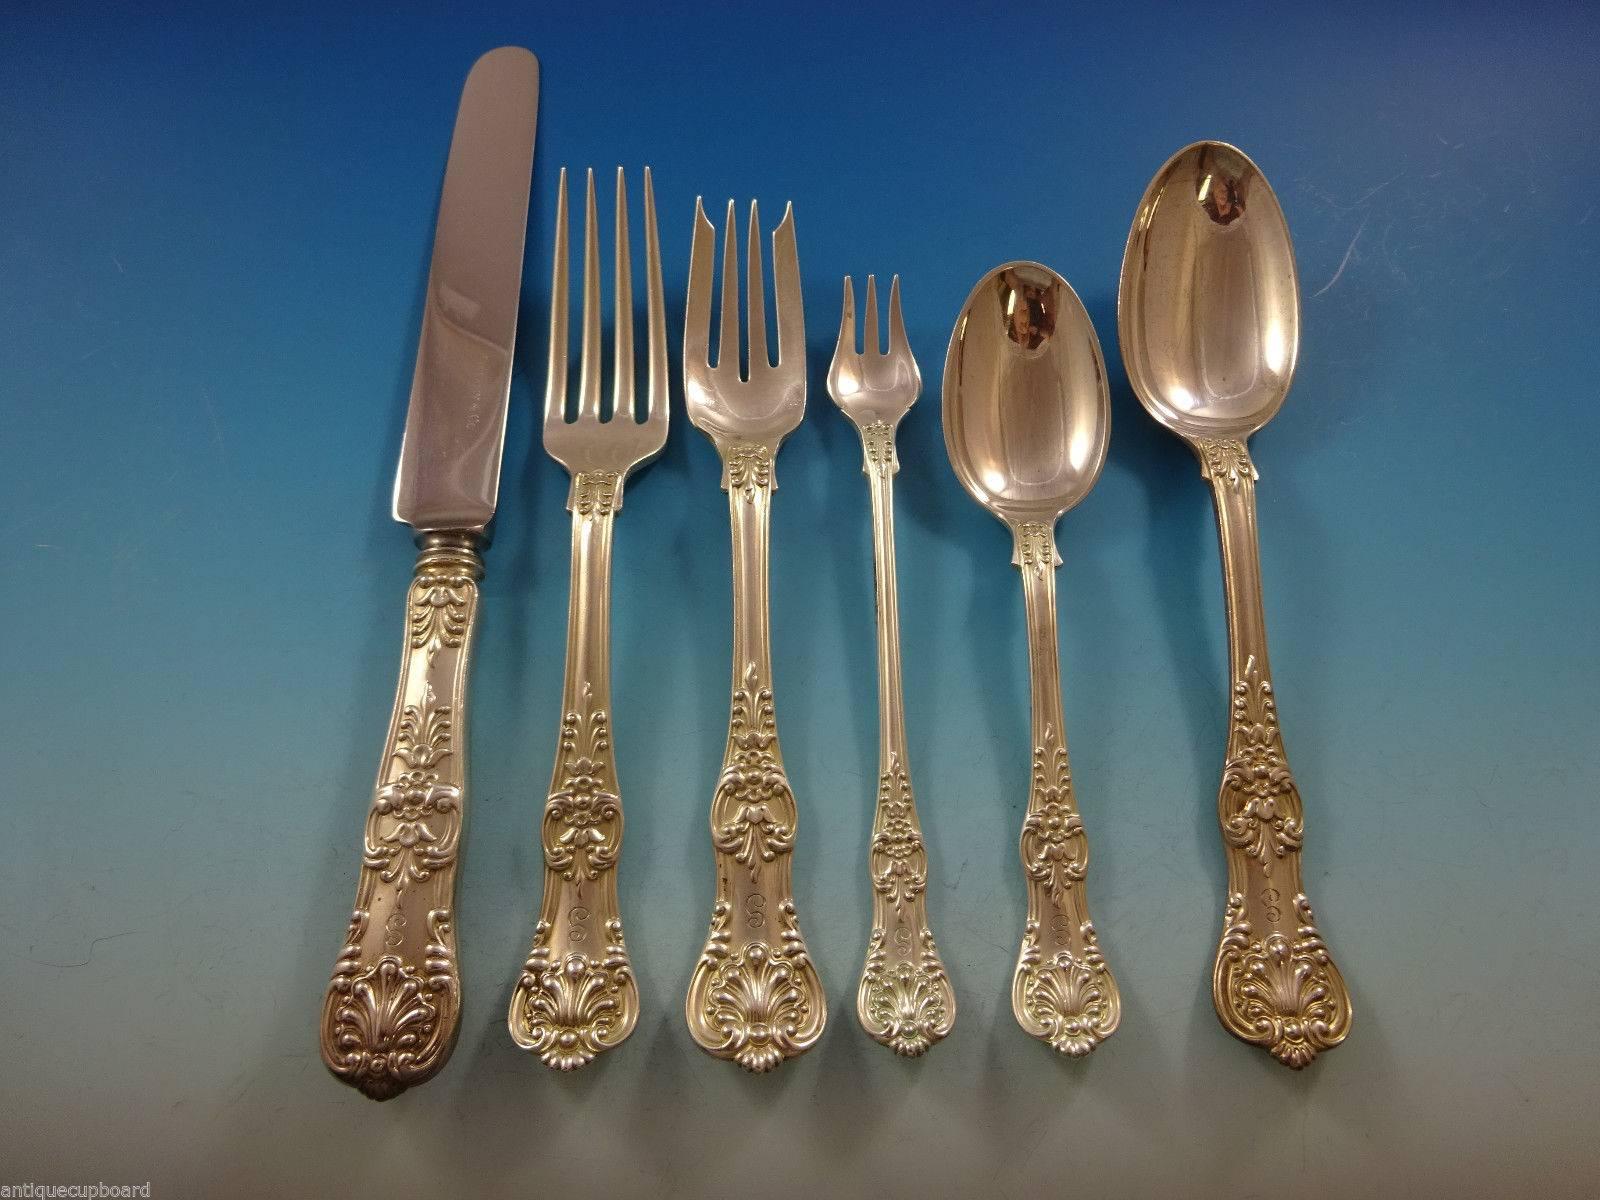 English King, circa 1885.

Patterns similar to our English King were first used in France and England late in the 18th century and have remained among the most popular styles for flatware today, in both Europe and America. Tiffany & Co. first made